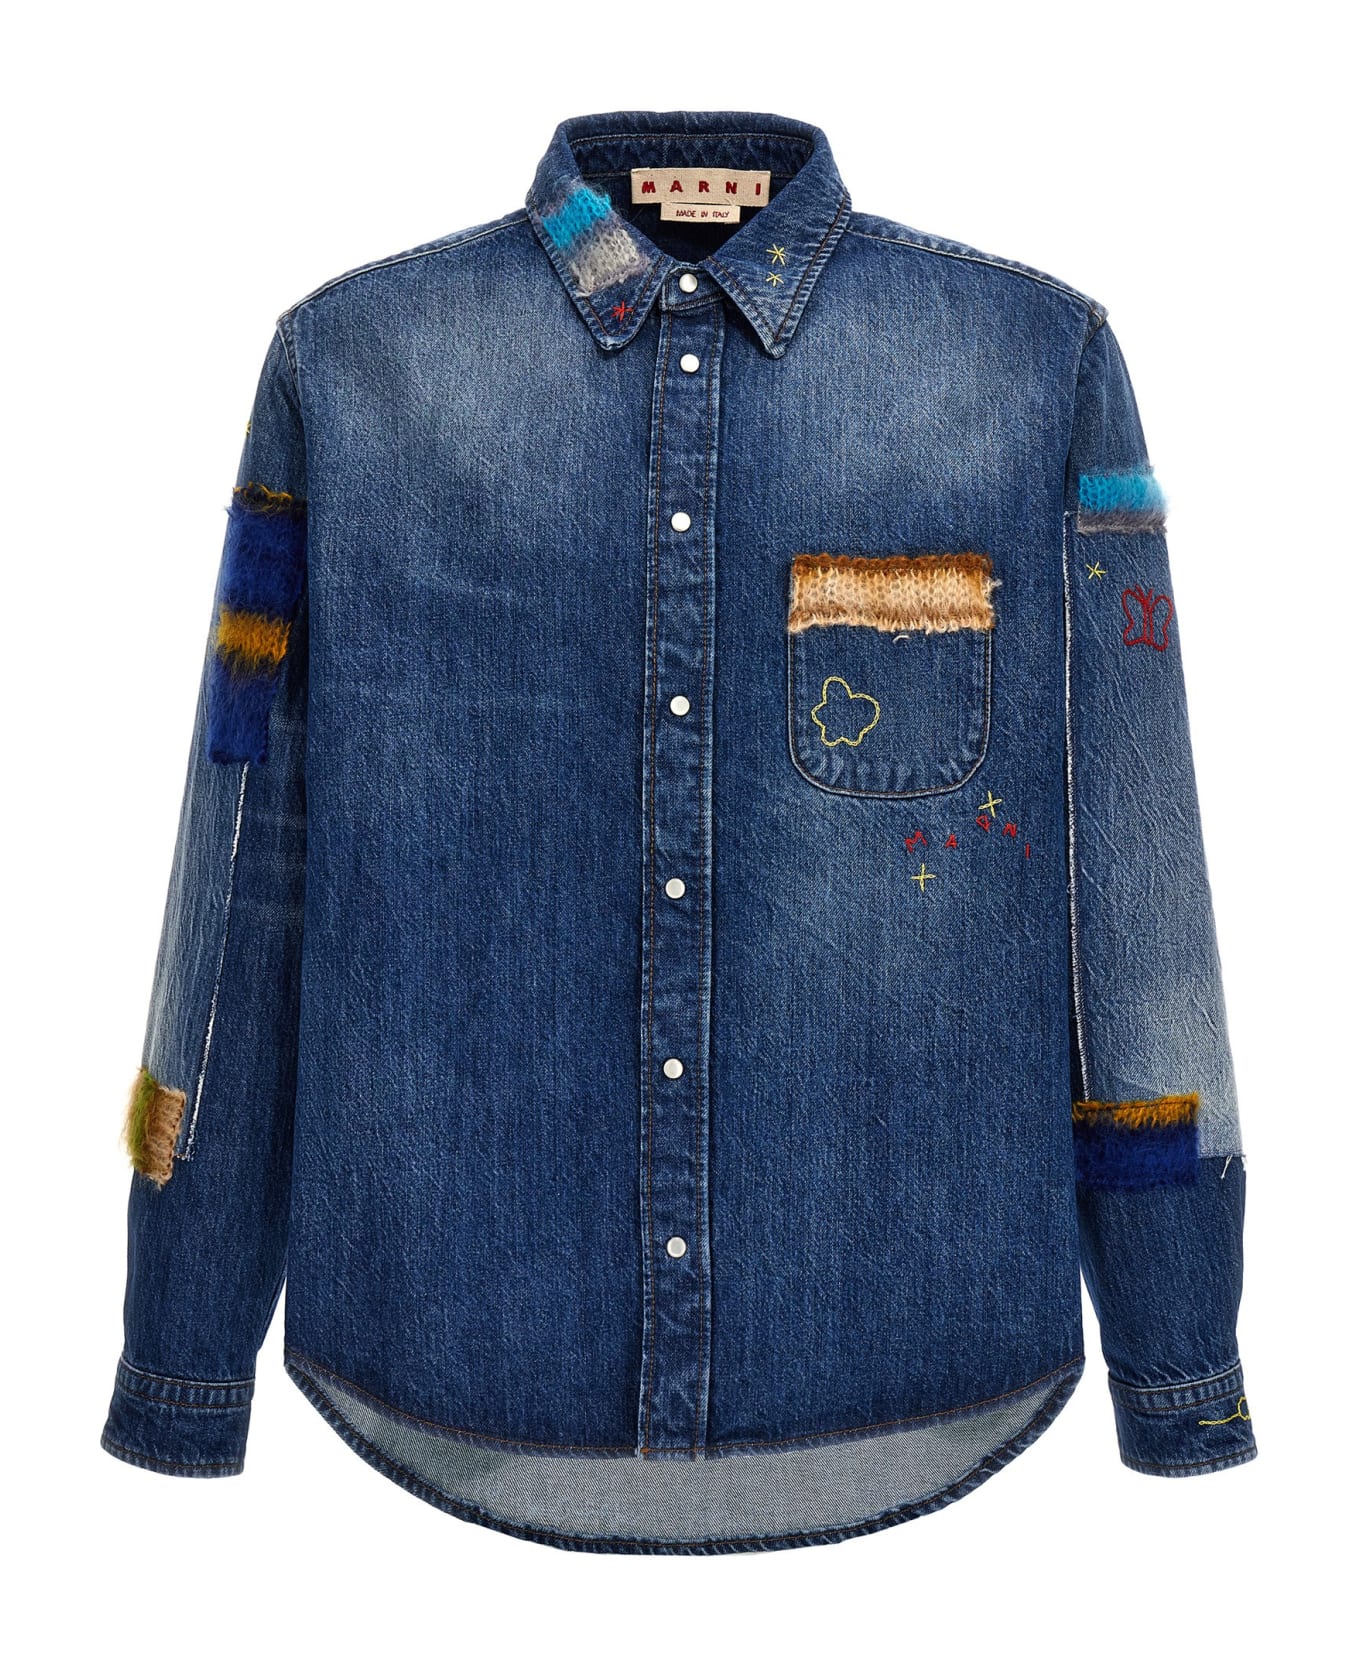 Marni Denim Shirt, Embroidery And Patches - Blue シャツ